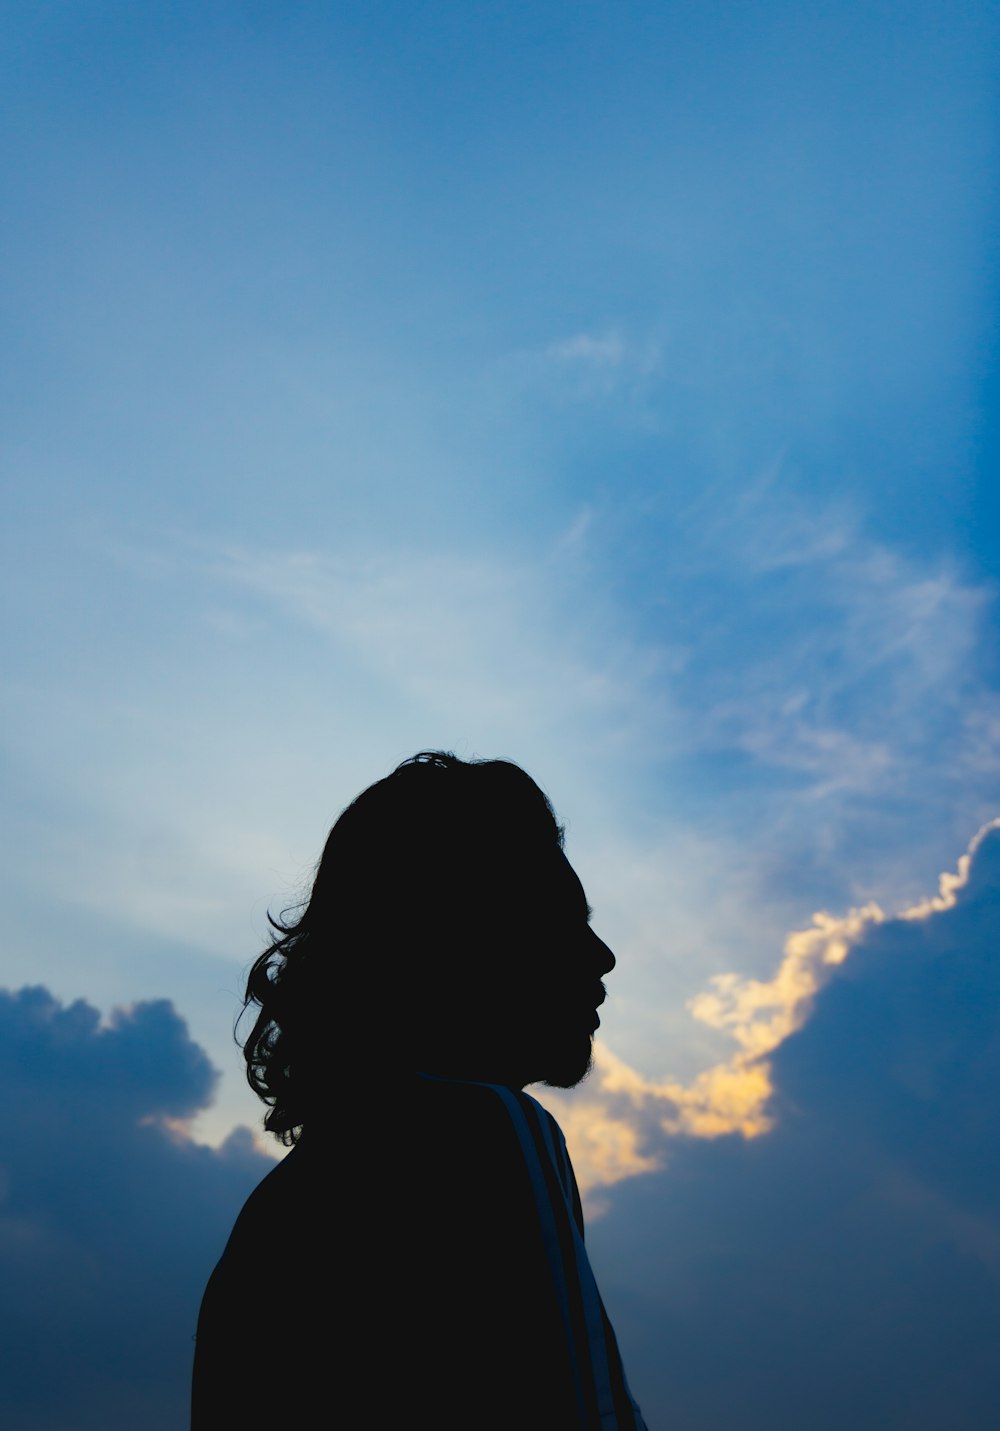 silhouette of woman under blue sky during daytime